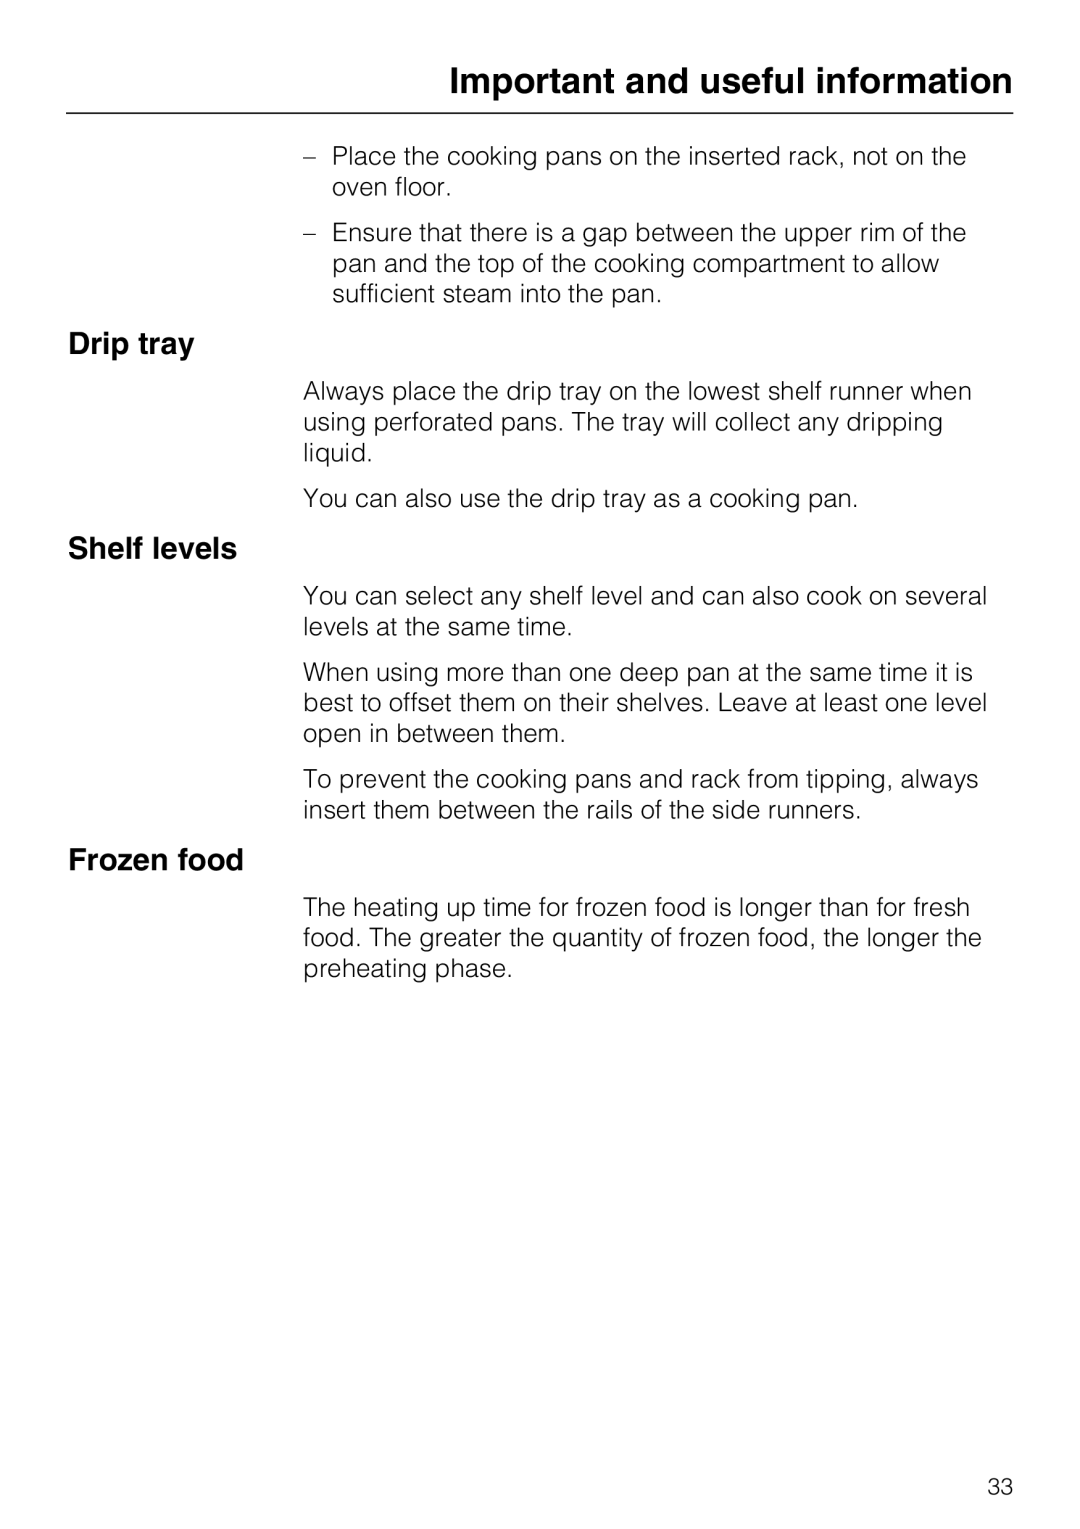 Miele 09 800 830 installation instructions Shelf levels, Frozen food, Important and useful information, Drip tray 